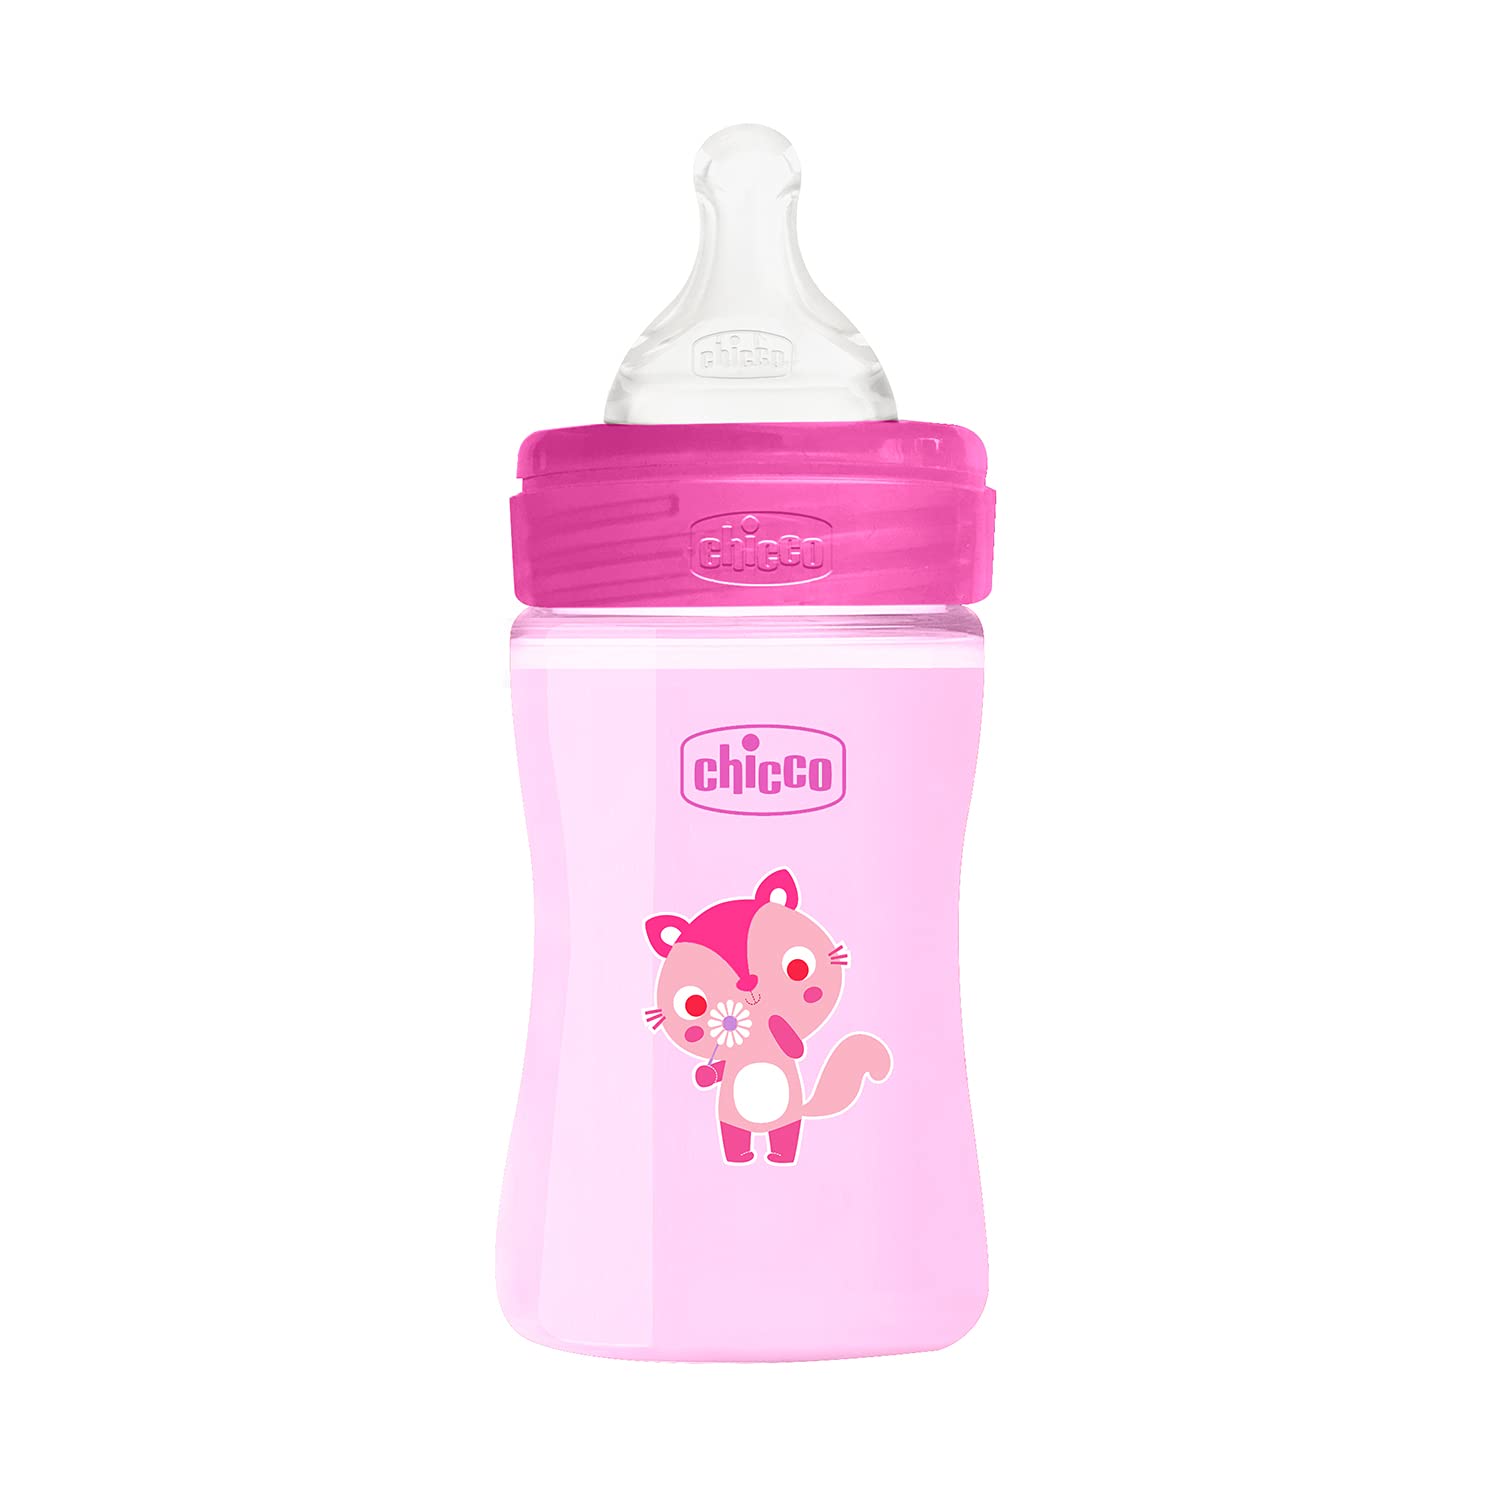 Chicco Well-Being 150ml Baby Coloured Feeding Bottle, Advanced Anti-Colic System, BPA Free, Hygienic Silicone Teat, Milk Bottle for Babies & Toddlers (Pink)